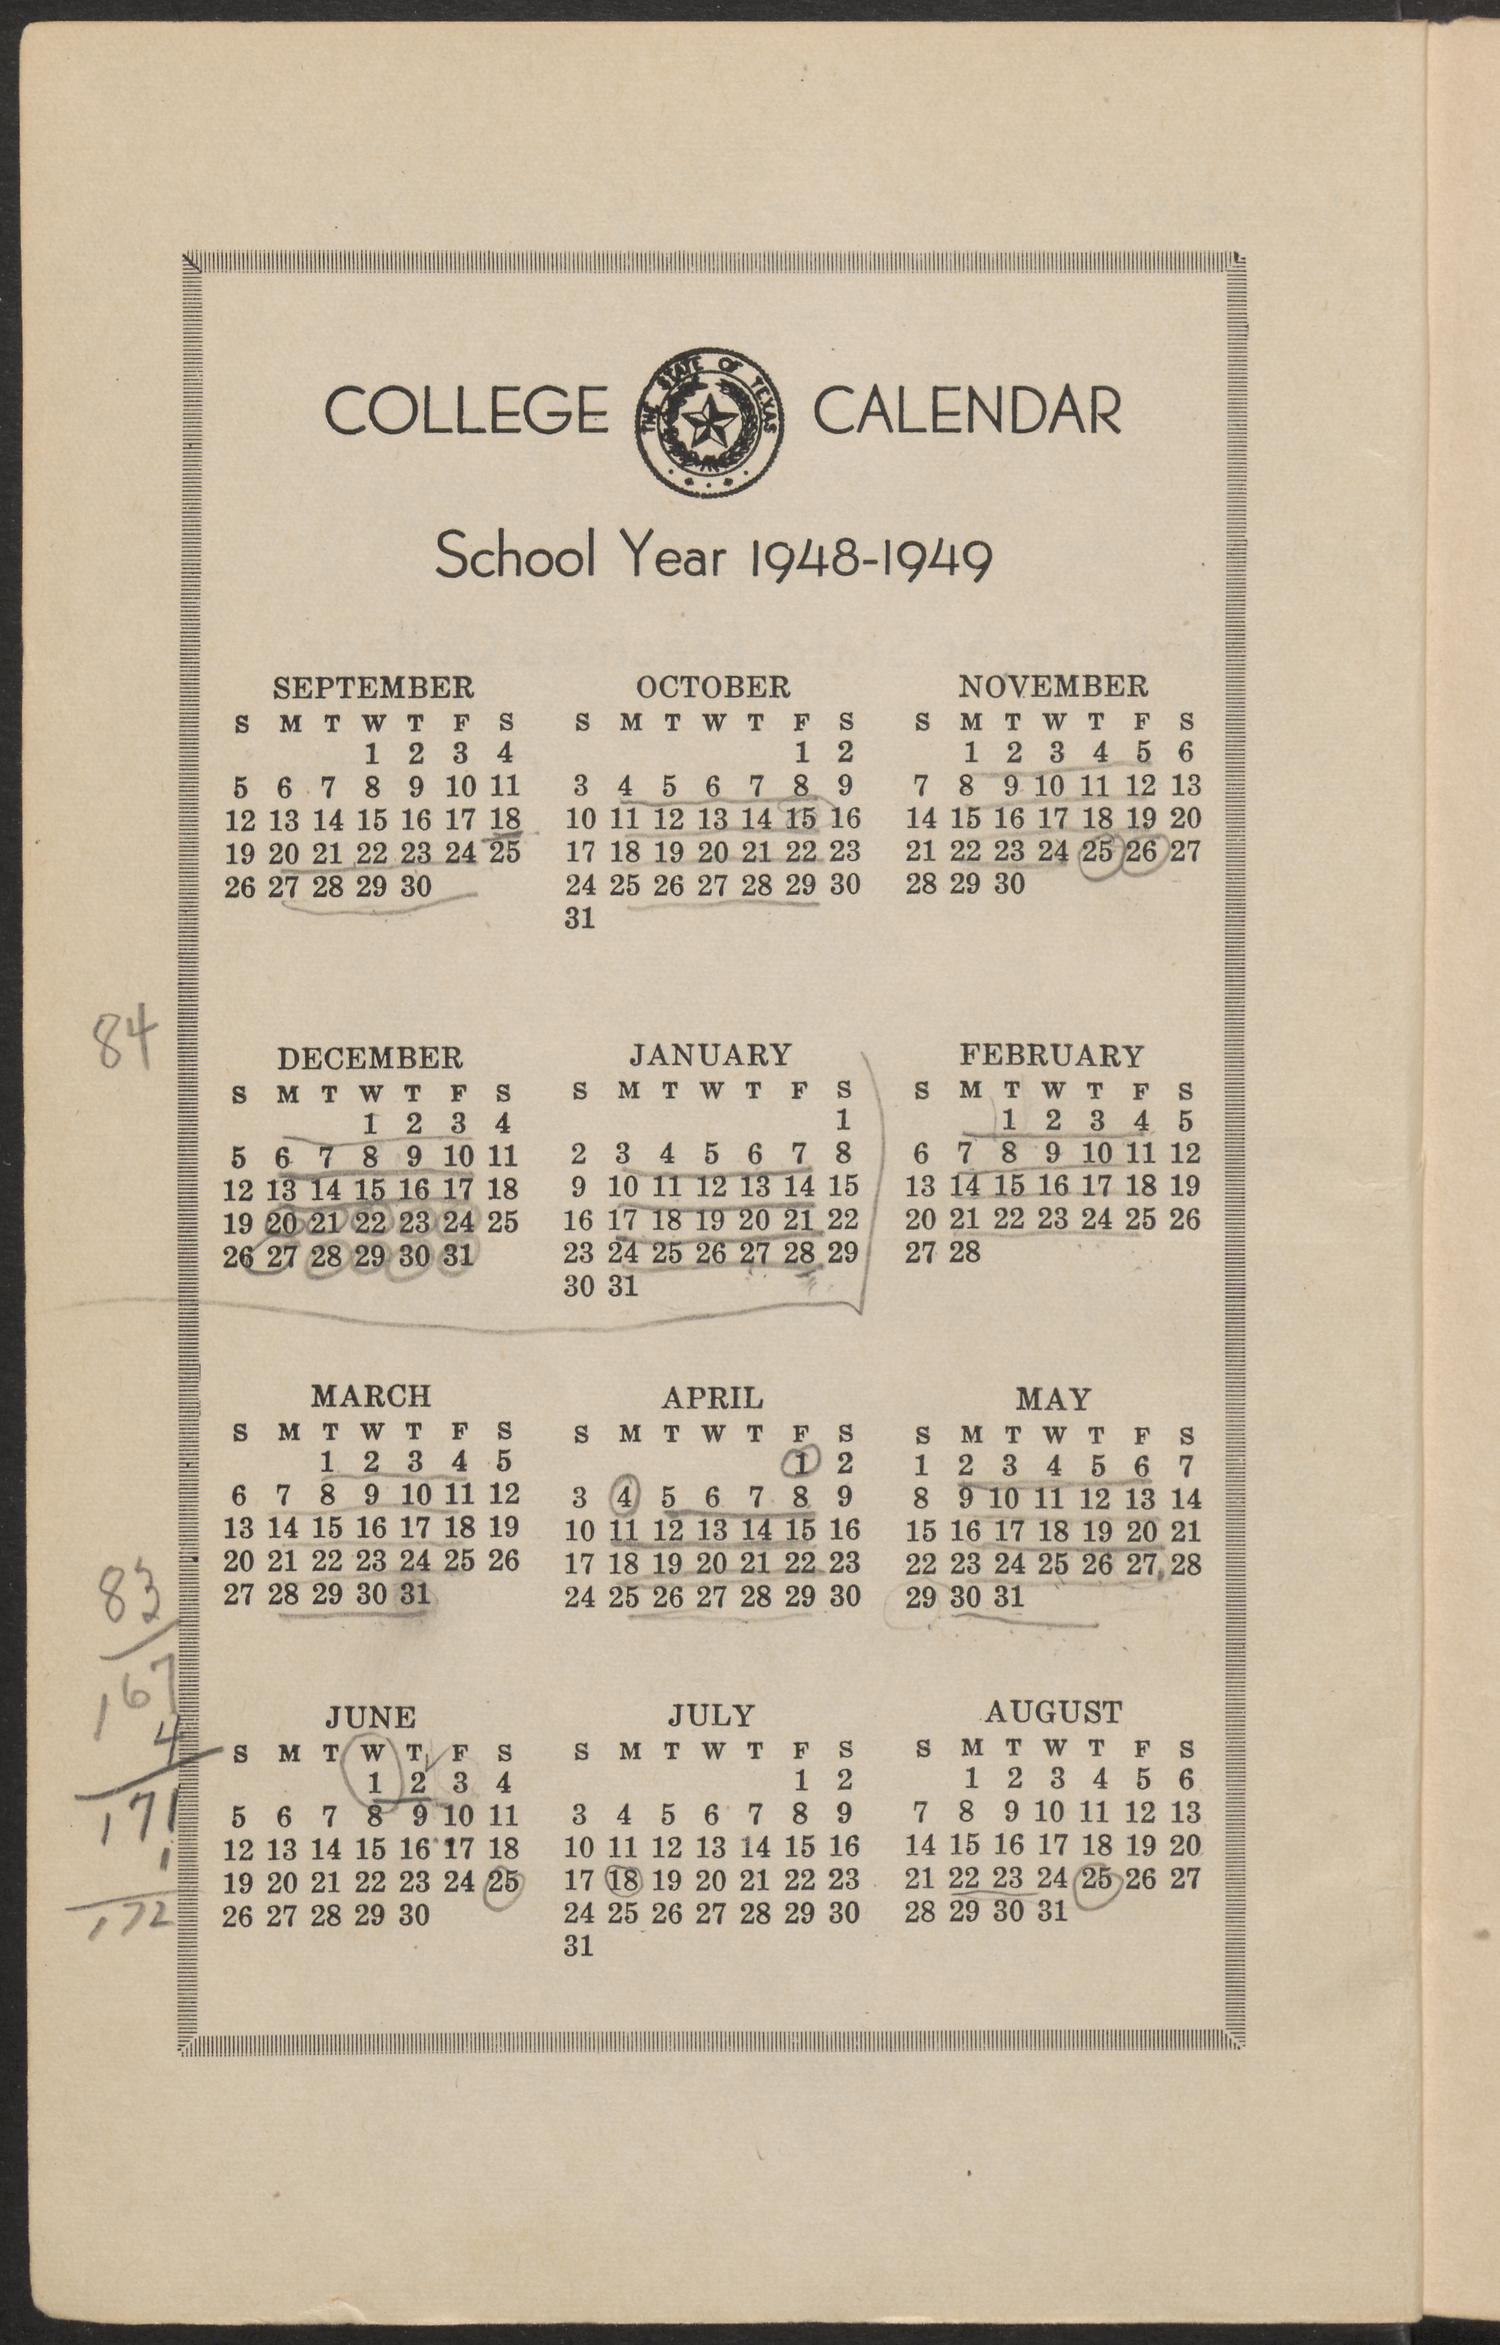 Catalog of North Texas State Teachers College: 1948-1949
                                                
                                                    2
                                                